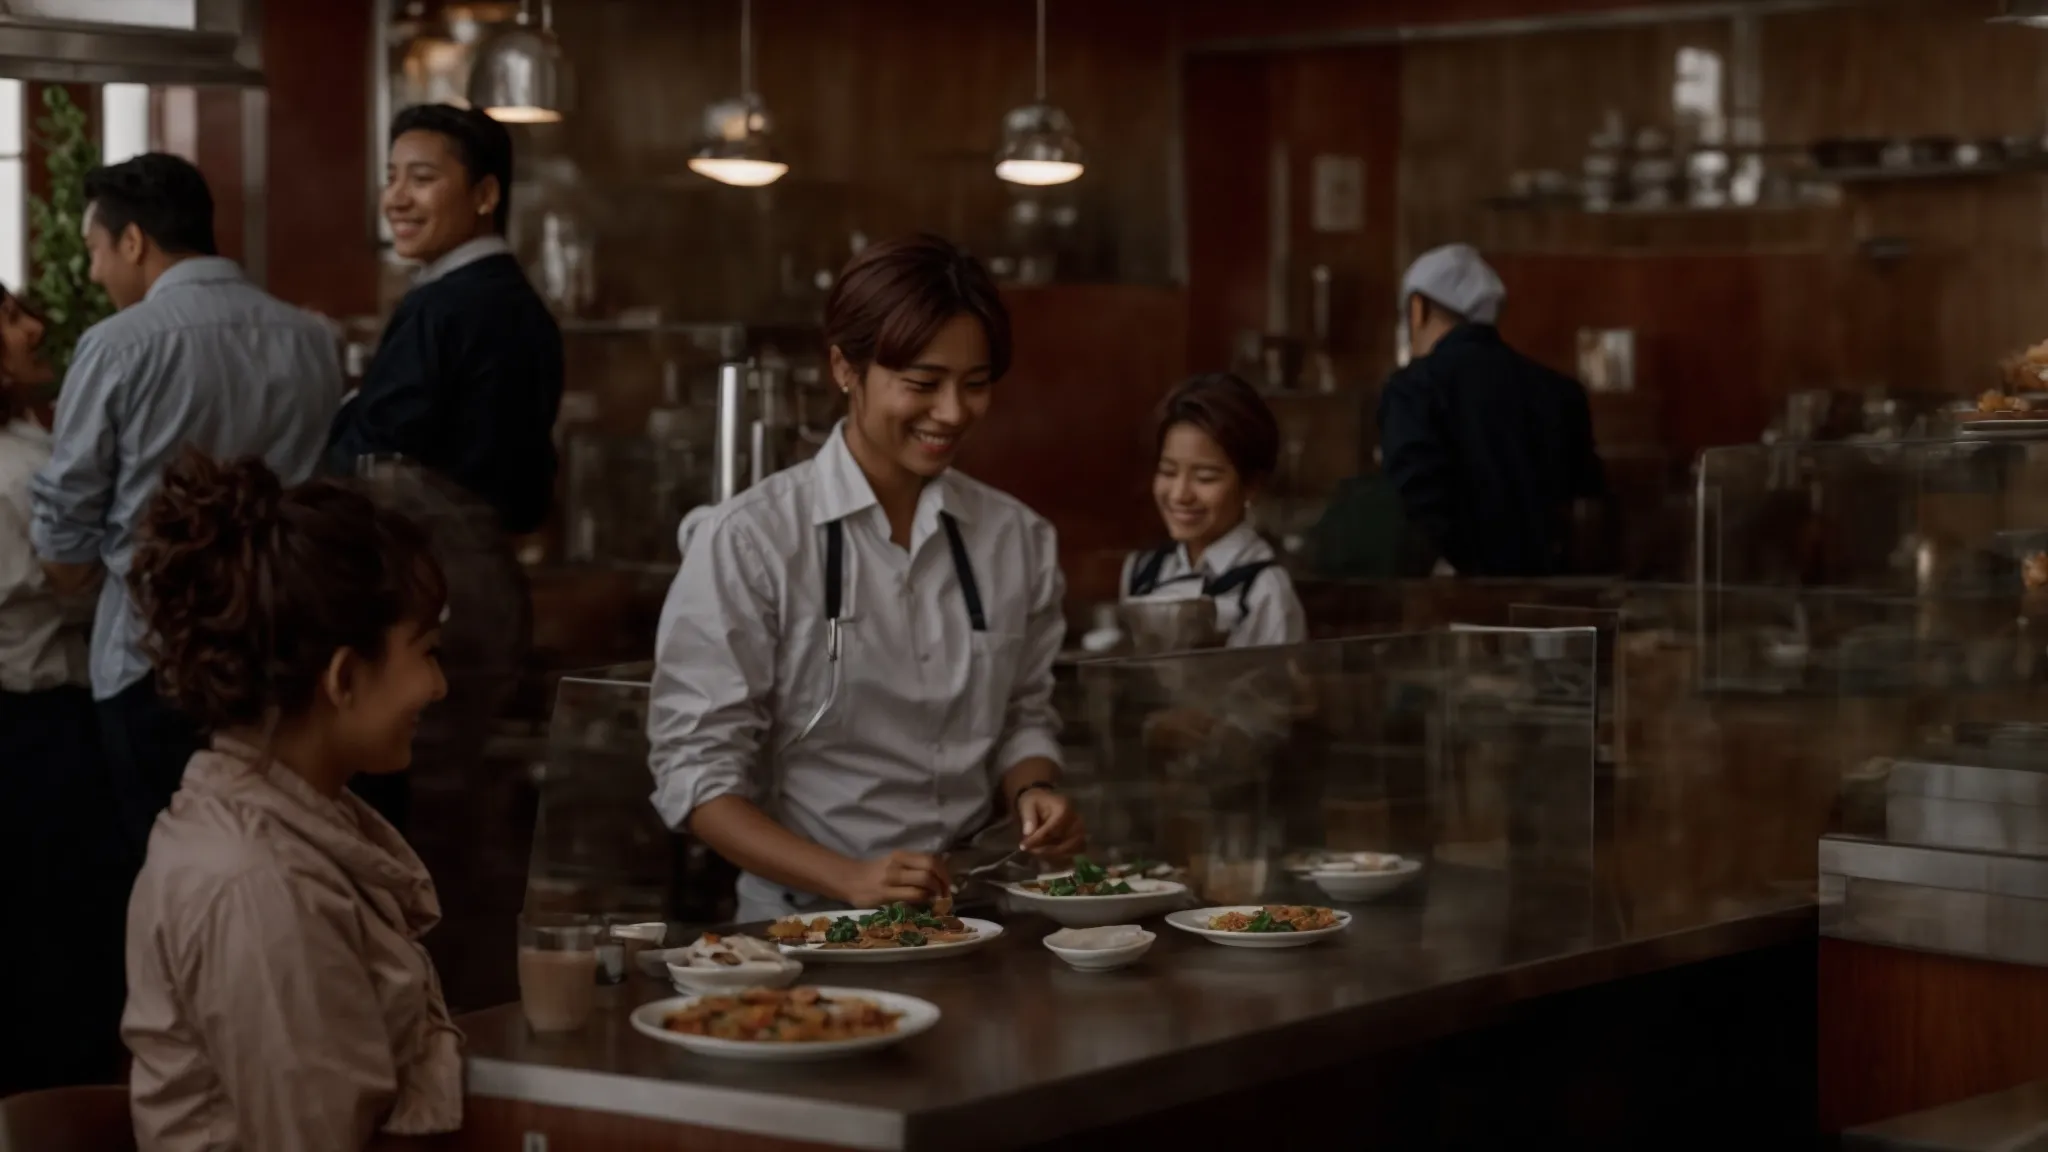 a bustling café where a server is smiling at a family while placing a dish on their table.